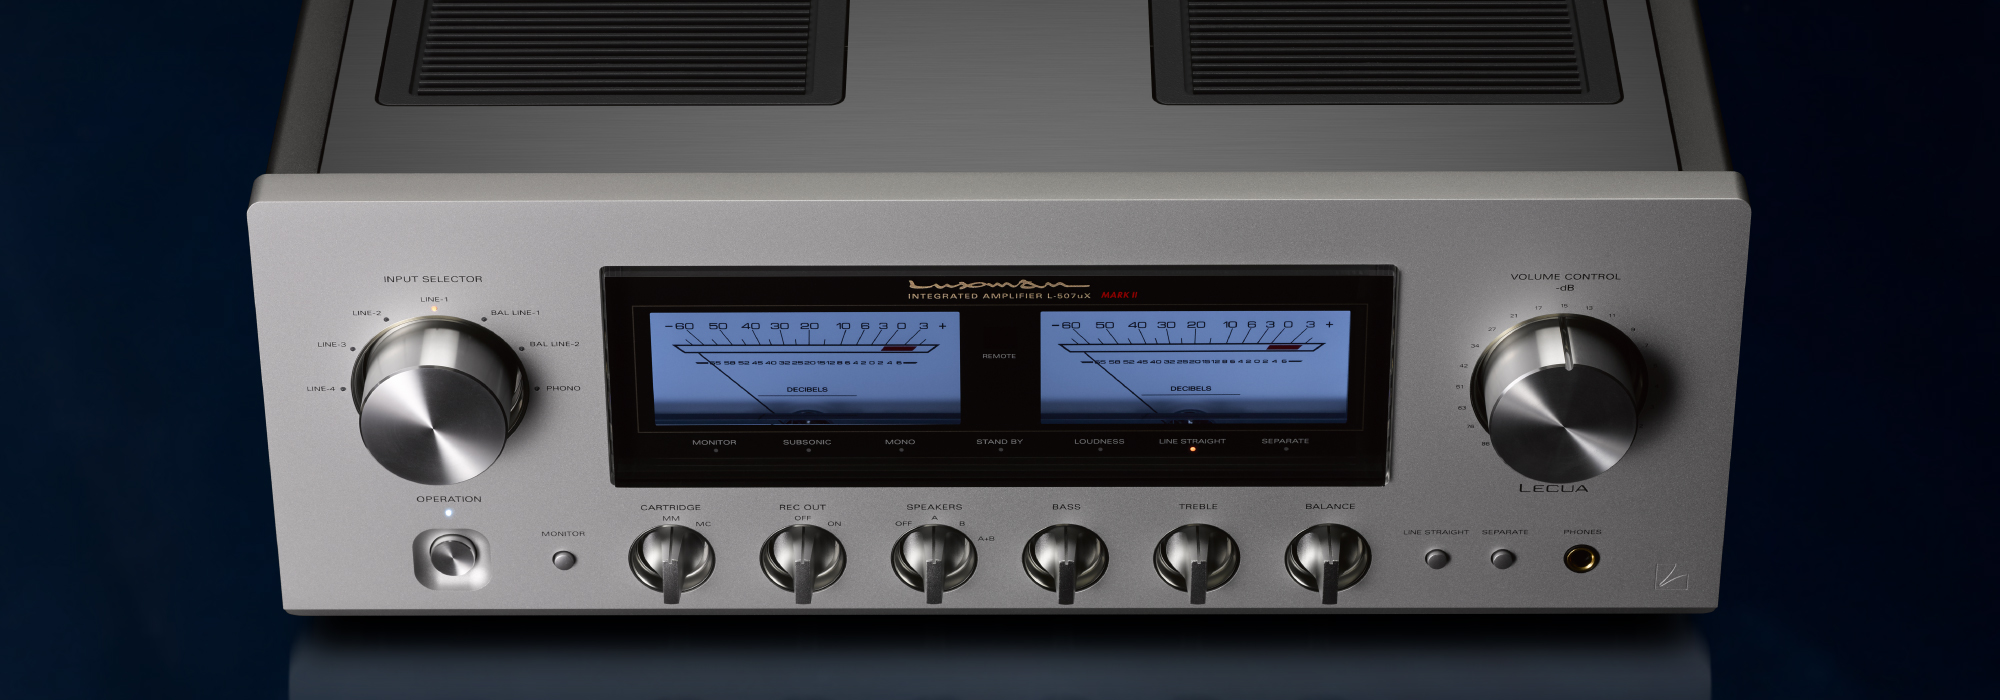 L-507uXII | INTEGRATED AMPLIFIERS | PRODUCTS | LUXMAN | Seeking 